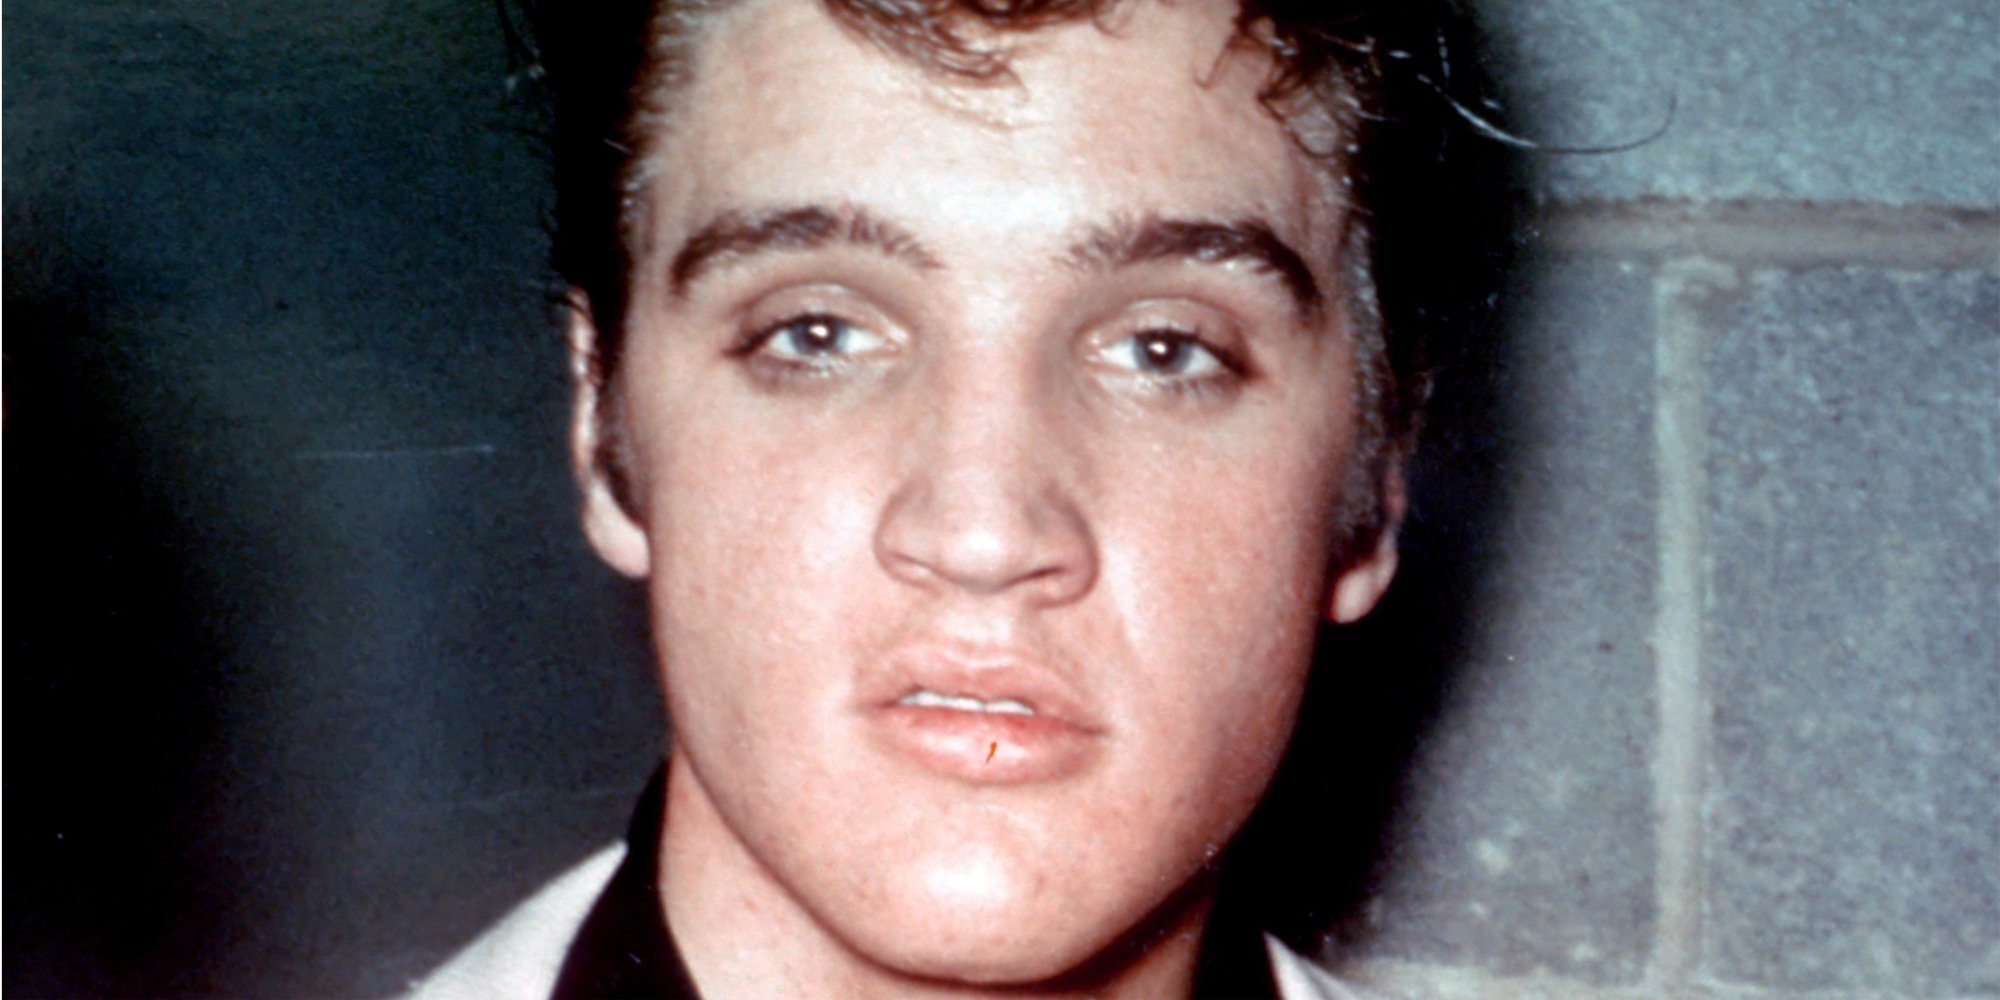 Reported germaphobe Elvis Presley looking directly at the camera.